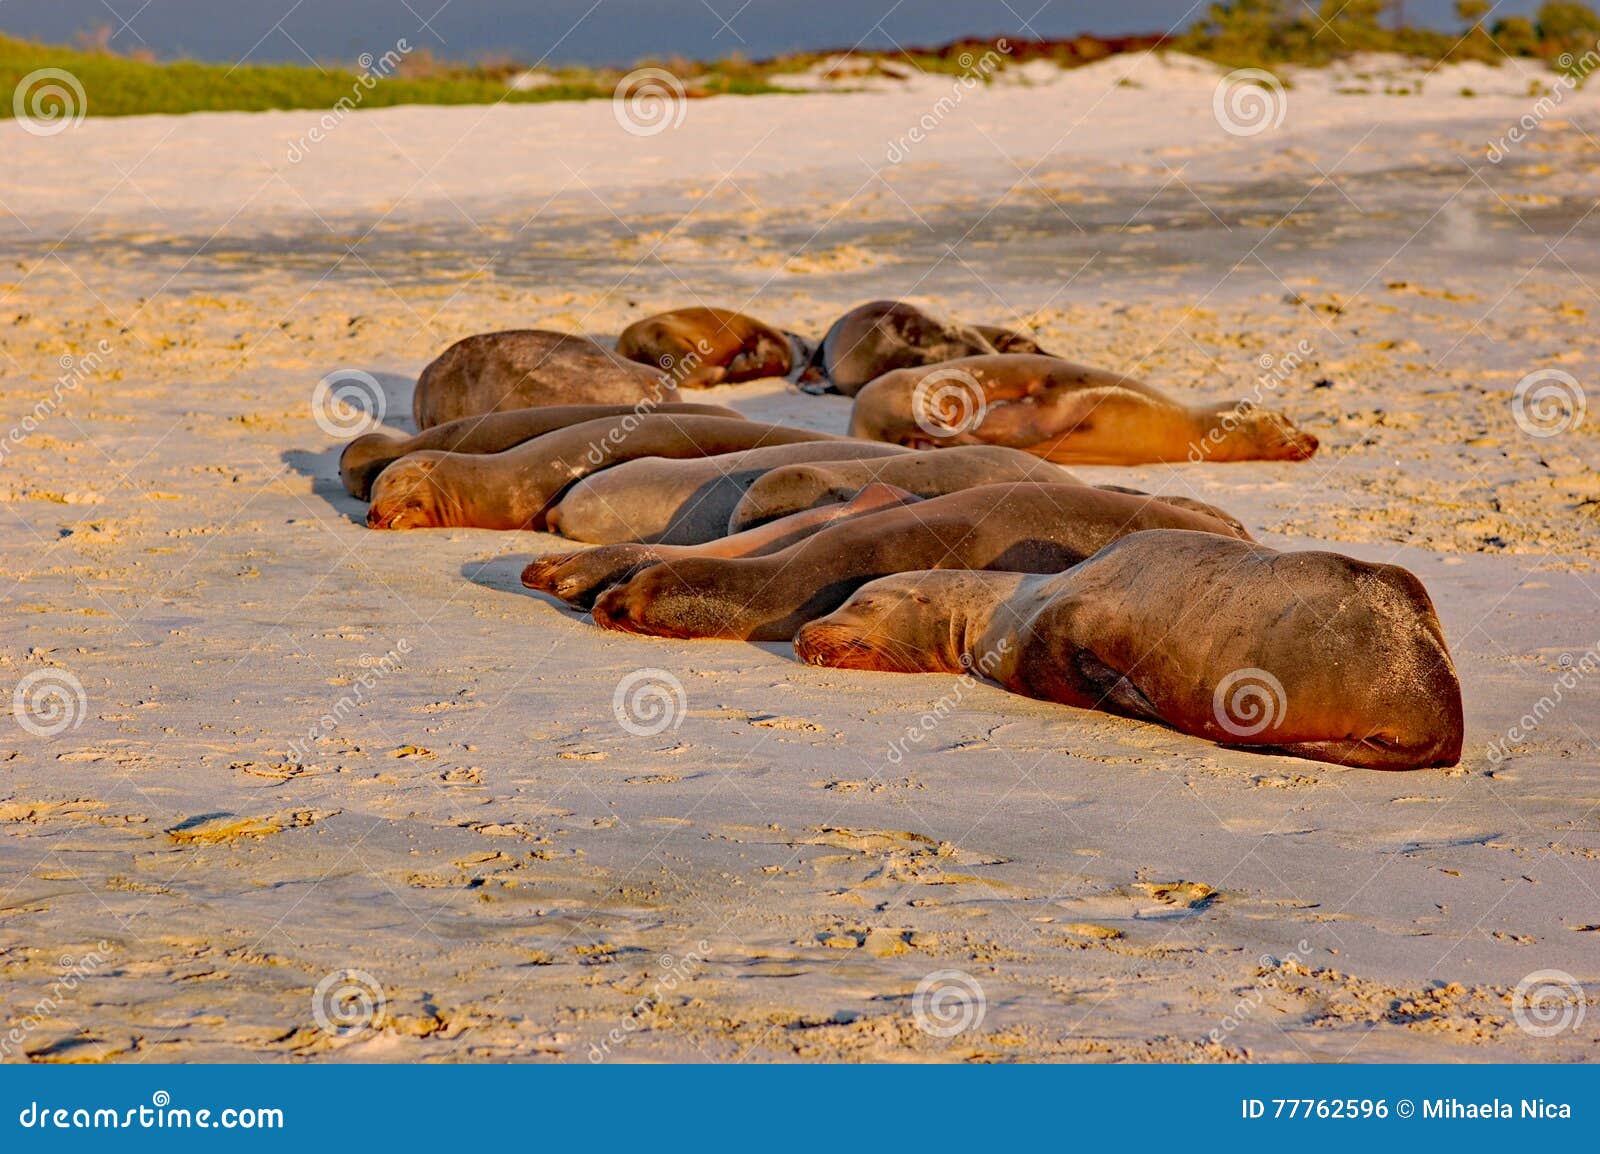 colony of galapagos sea lions sleeping in sunset light